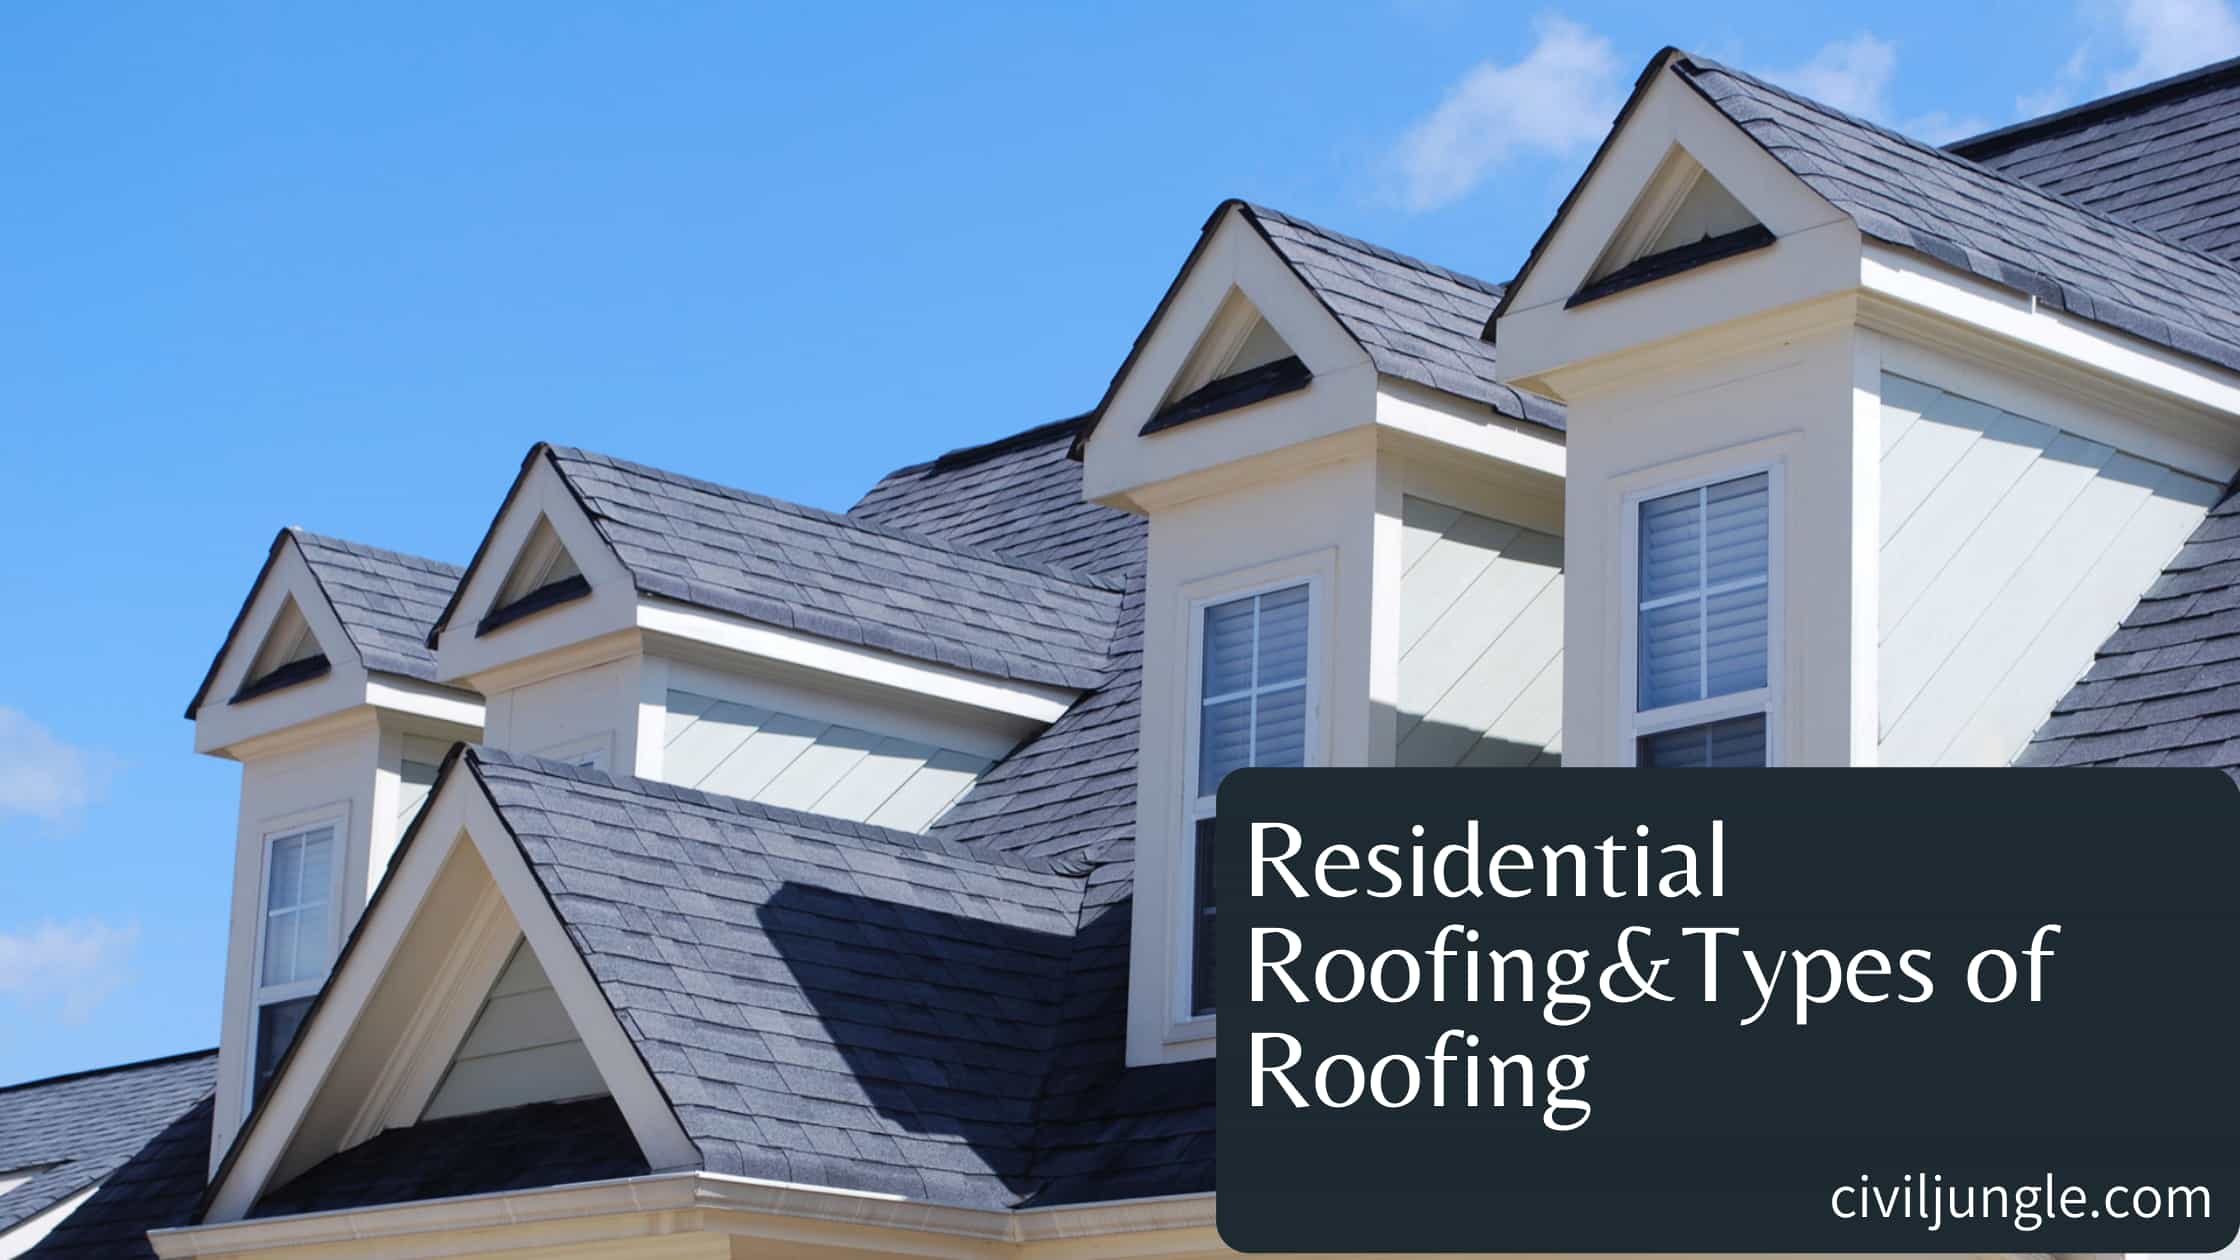 Residential Roofing & Types of Roofing